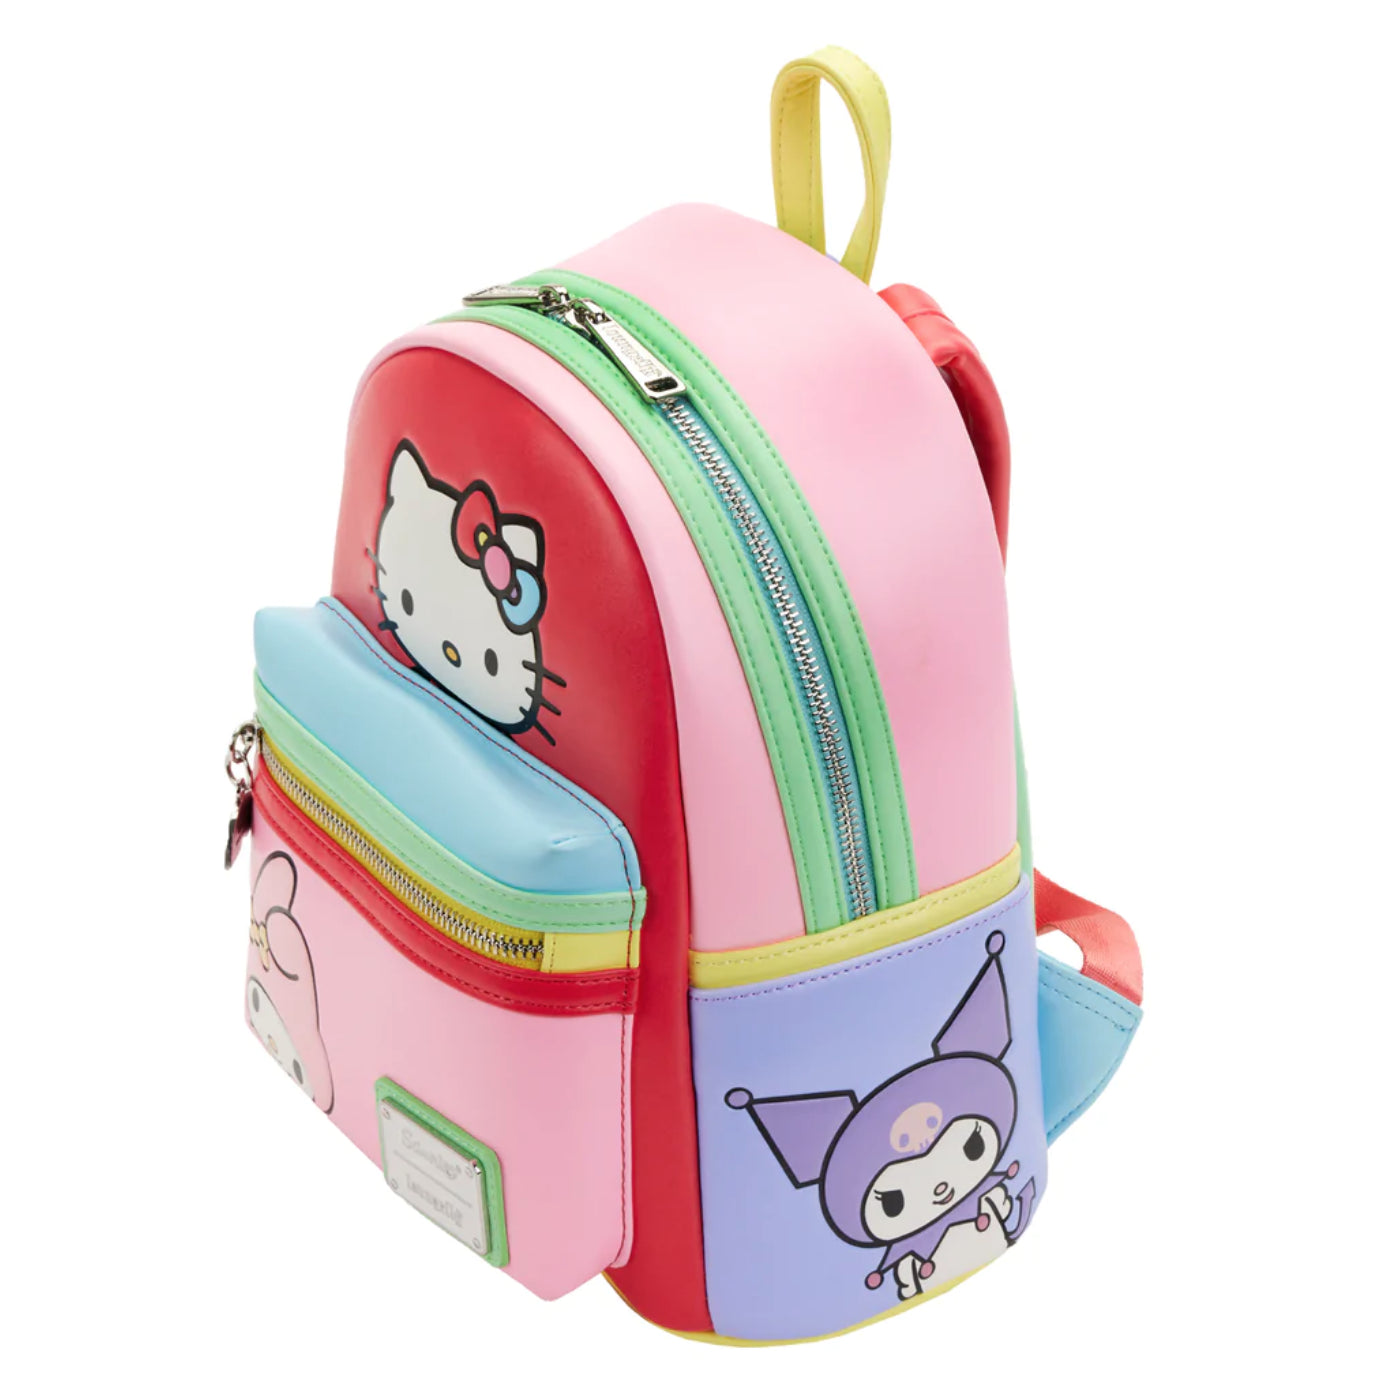 HELLO KITTY AND FRIENDS COLOR BLOCK MINI BACKPACK